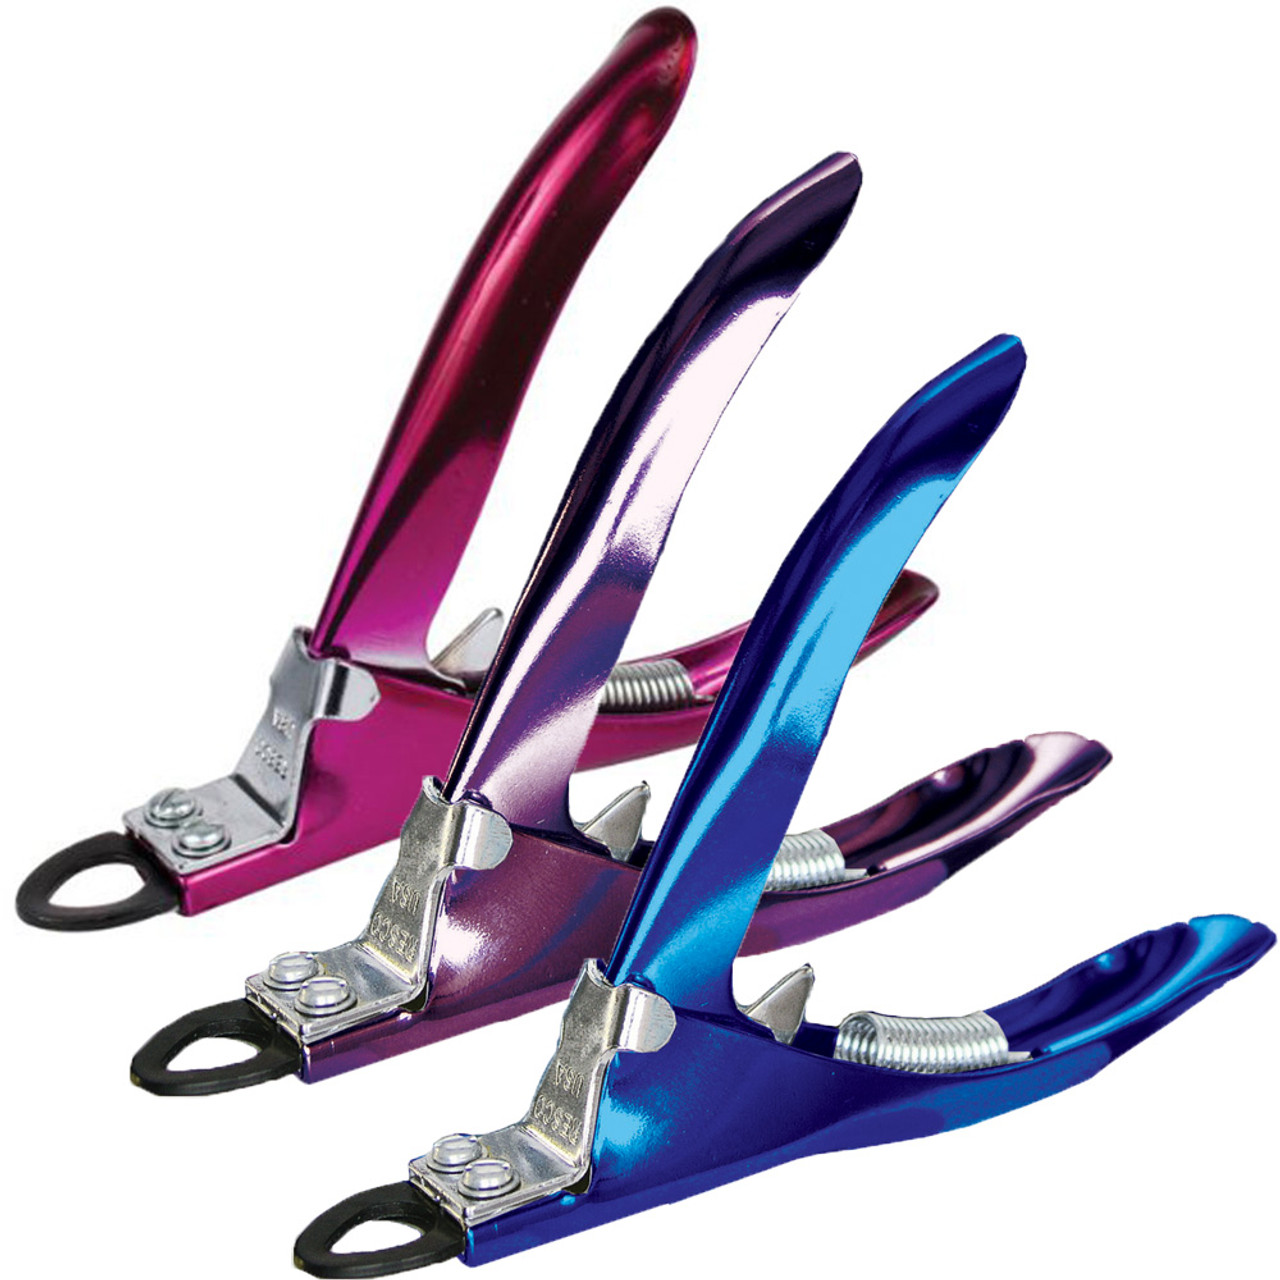 Pet Nail Clippers : Amazon.com: Millers Forge Stainless Steel Dog Nail  Clipper, Plier Style